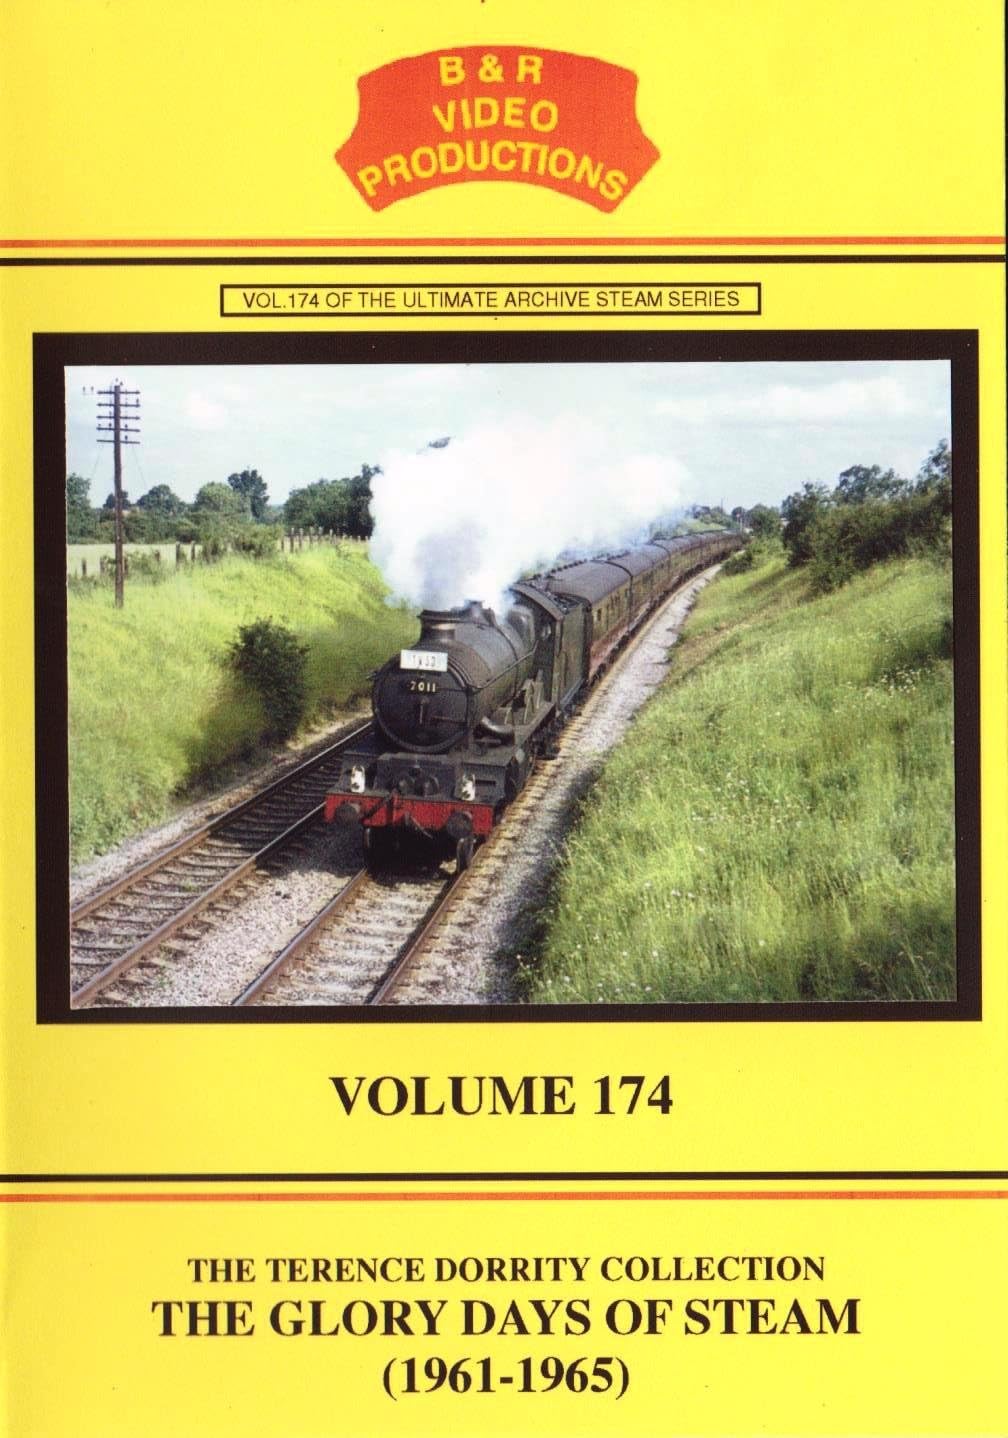 B & R Video Productions Vol 174 - The Terence Dorrity collection The glory days of steam (1961-1965)